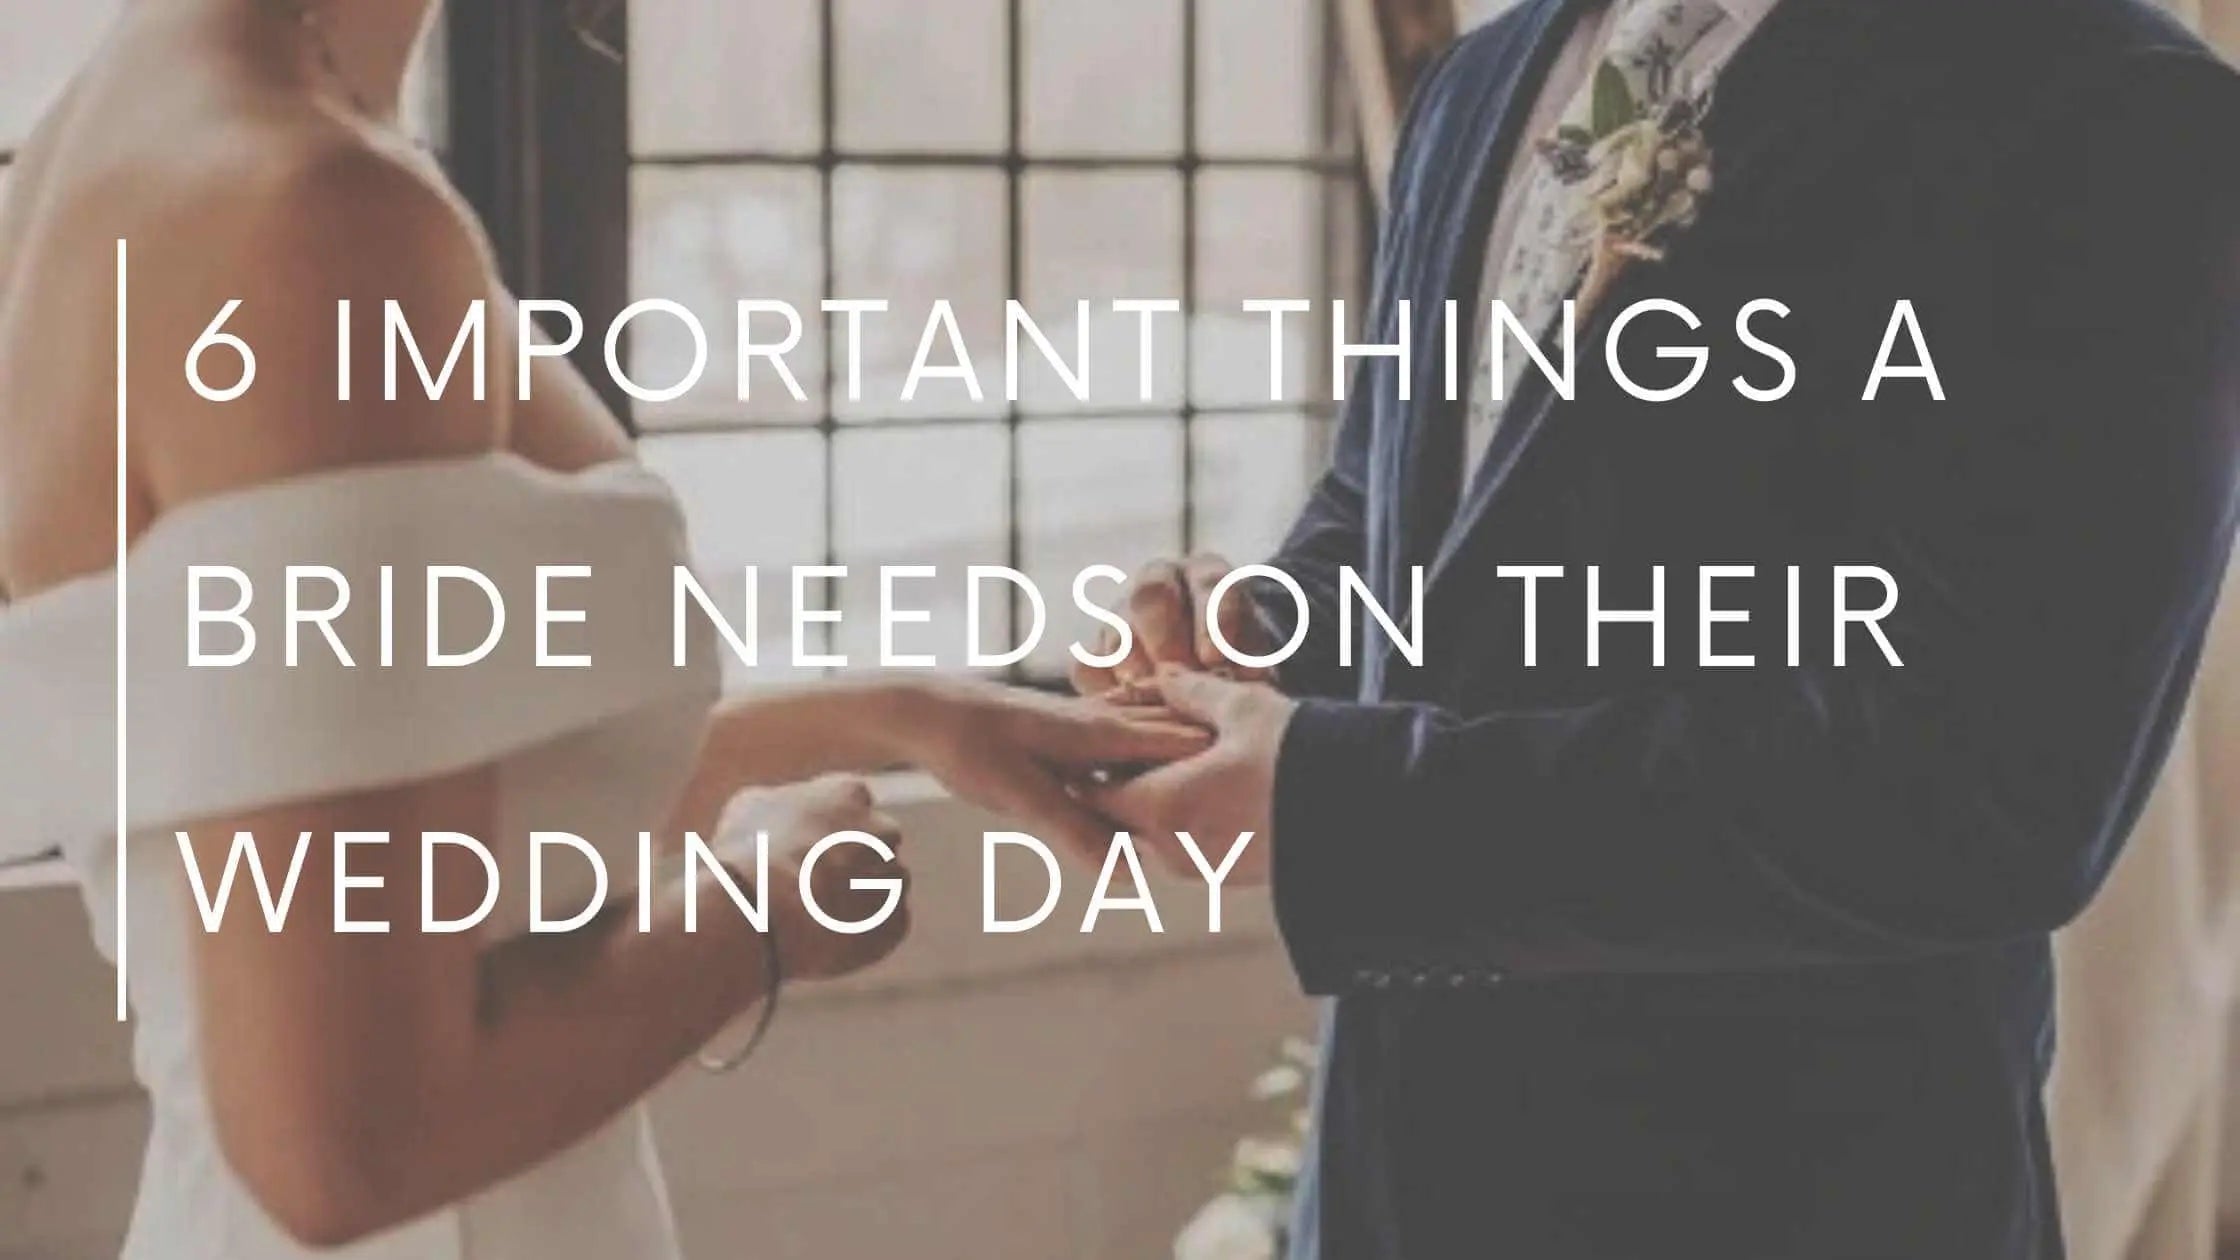 6 Important Things a Bride Needs on Their Wedding Day